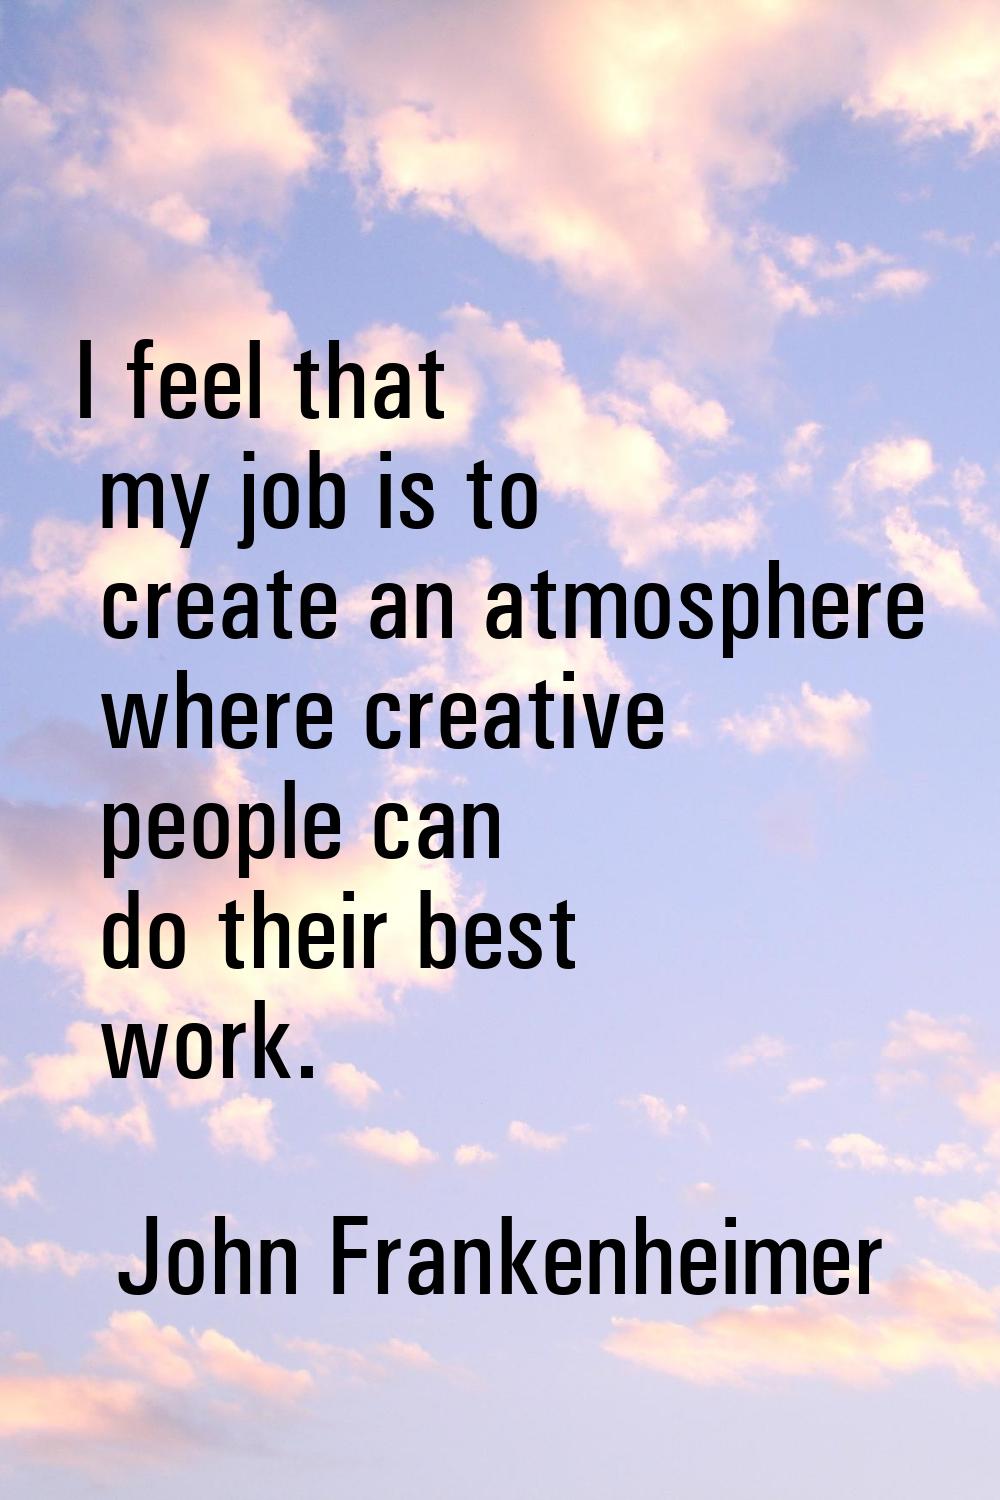 I feel that my job is to create an atmosphere where creative people can do their best work.